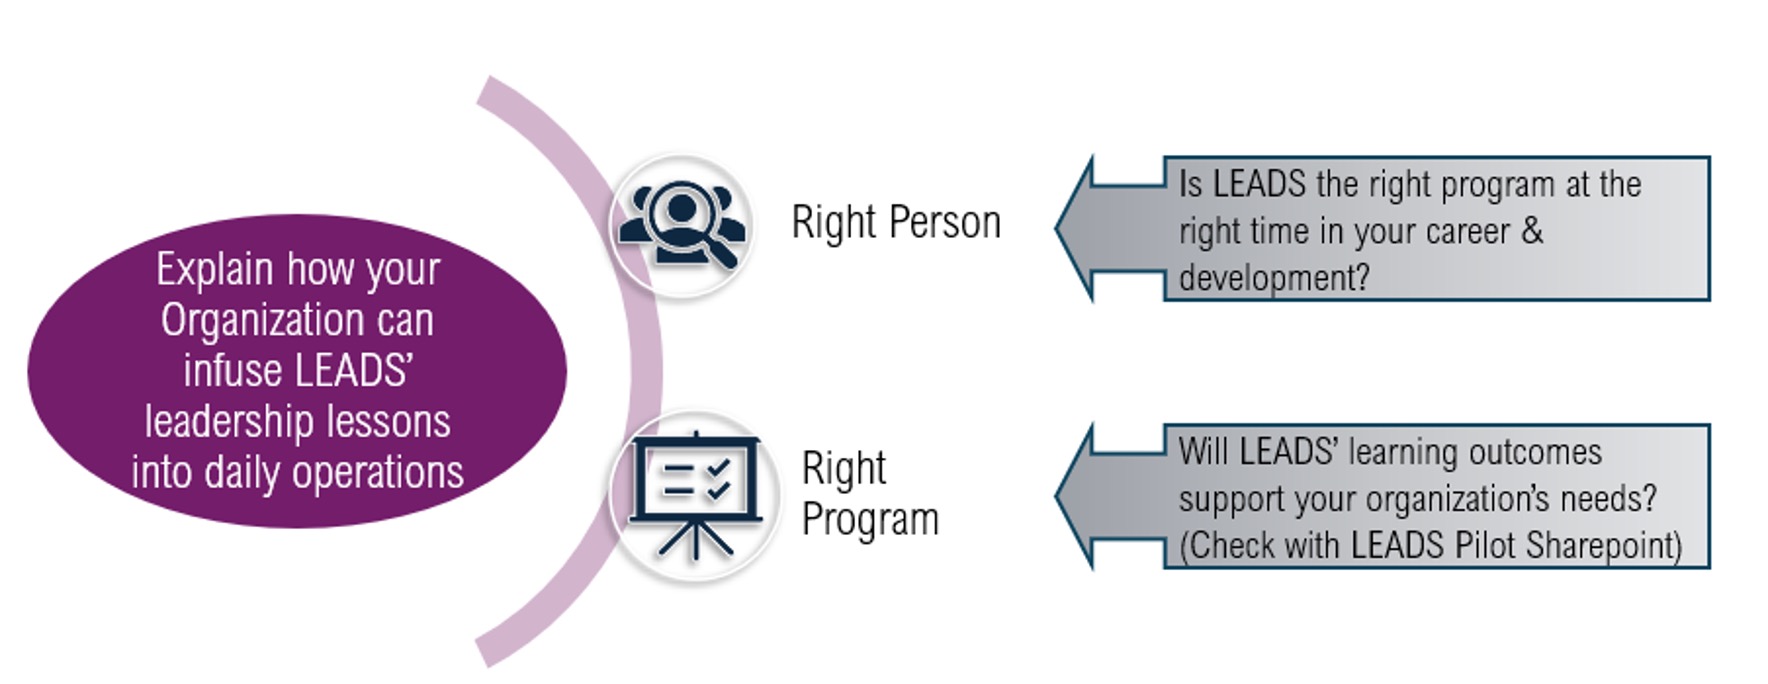 The image is a flowchart describing how an organization can integrate LEADS leadership lessons into daily operations. It consists of two main sections: 1. A purple oval shape on the left side contains the text: "Explain how your Organization can infuse LEADS' leadership lessons into daily operations." 2. Two arrows pointing to the right from the oval, each with an icon and text: - The top arrow is labeled "Right Person" and includes an icon of three people with a magnifying glass. The text next to it reads: "Is LEADS the right program at the right time in your career & development?" - The bottom arrow is labeled "Right Program" and includes an icon of a presentation board with checkmarks. The text next to it reads: "Will LEADS' learning outcomes support your organization’s needs? (Check with LEADS Pilot Sharepoint)." The design uses a light gray and purple color scheme with clear, legible text and simple icons.